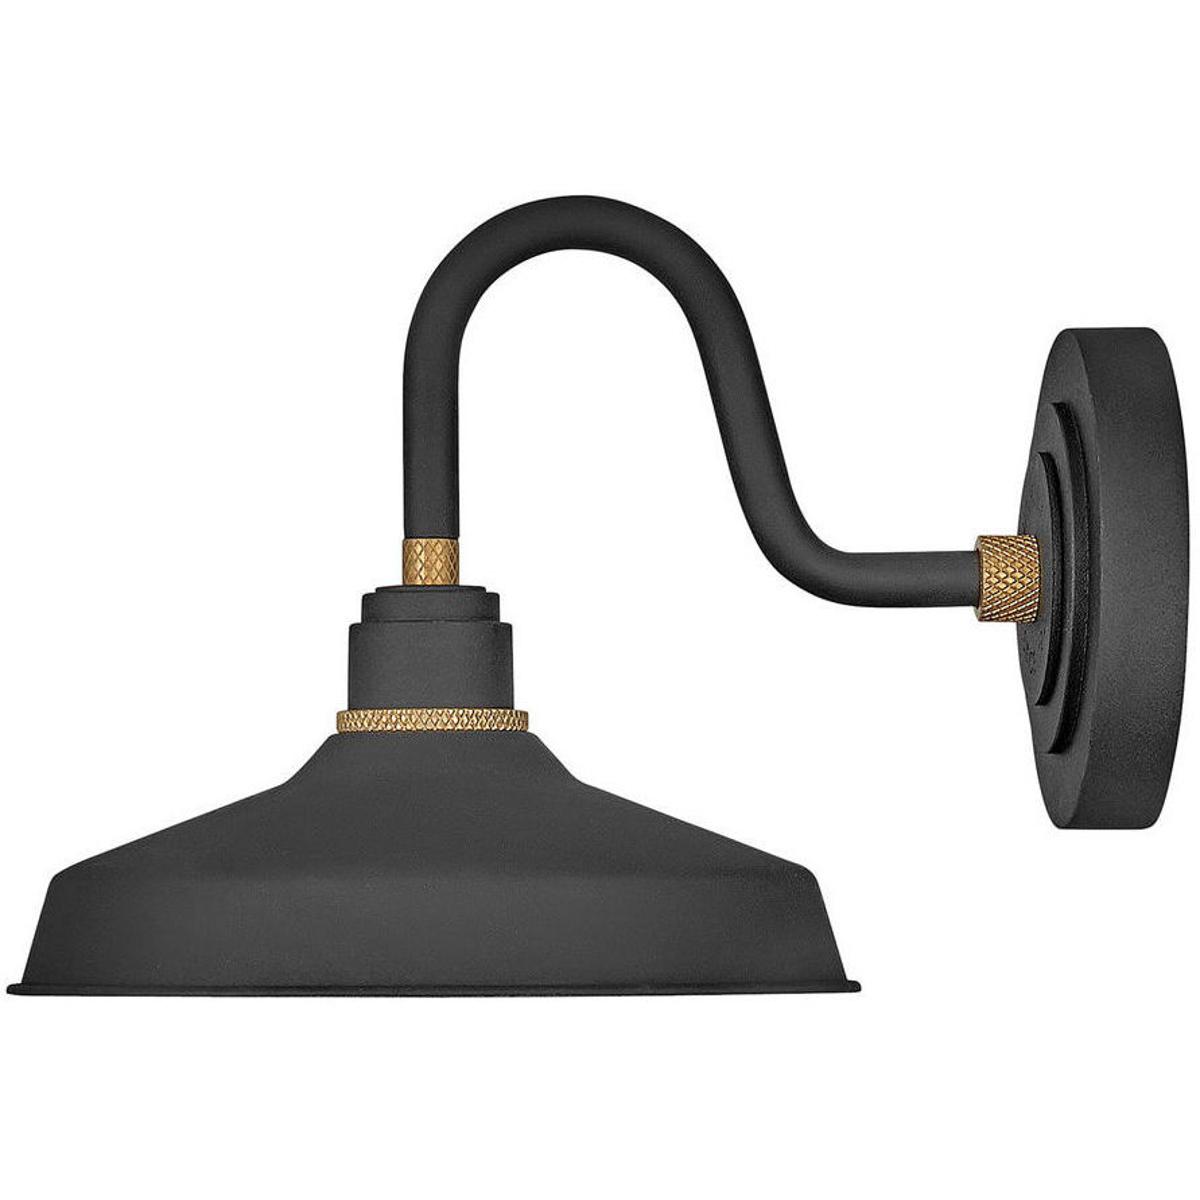 Hinkley 10231TK Foundry Classic LED 9.25 inch Textured Black with Brass Outdoor Barn Light, Gooseneck